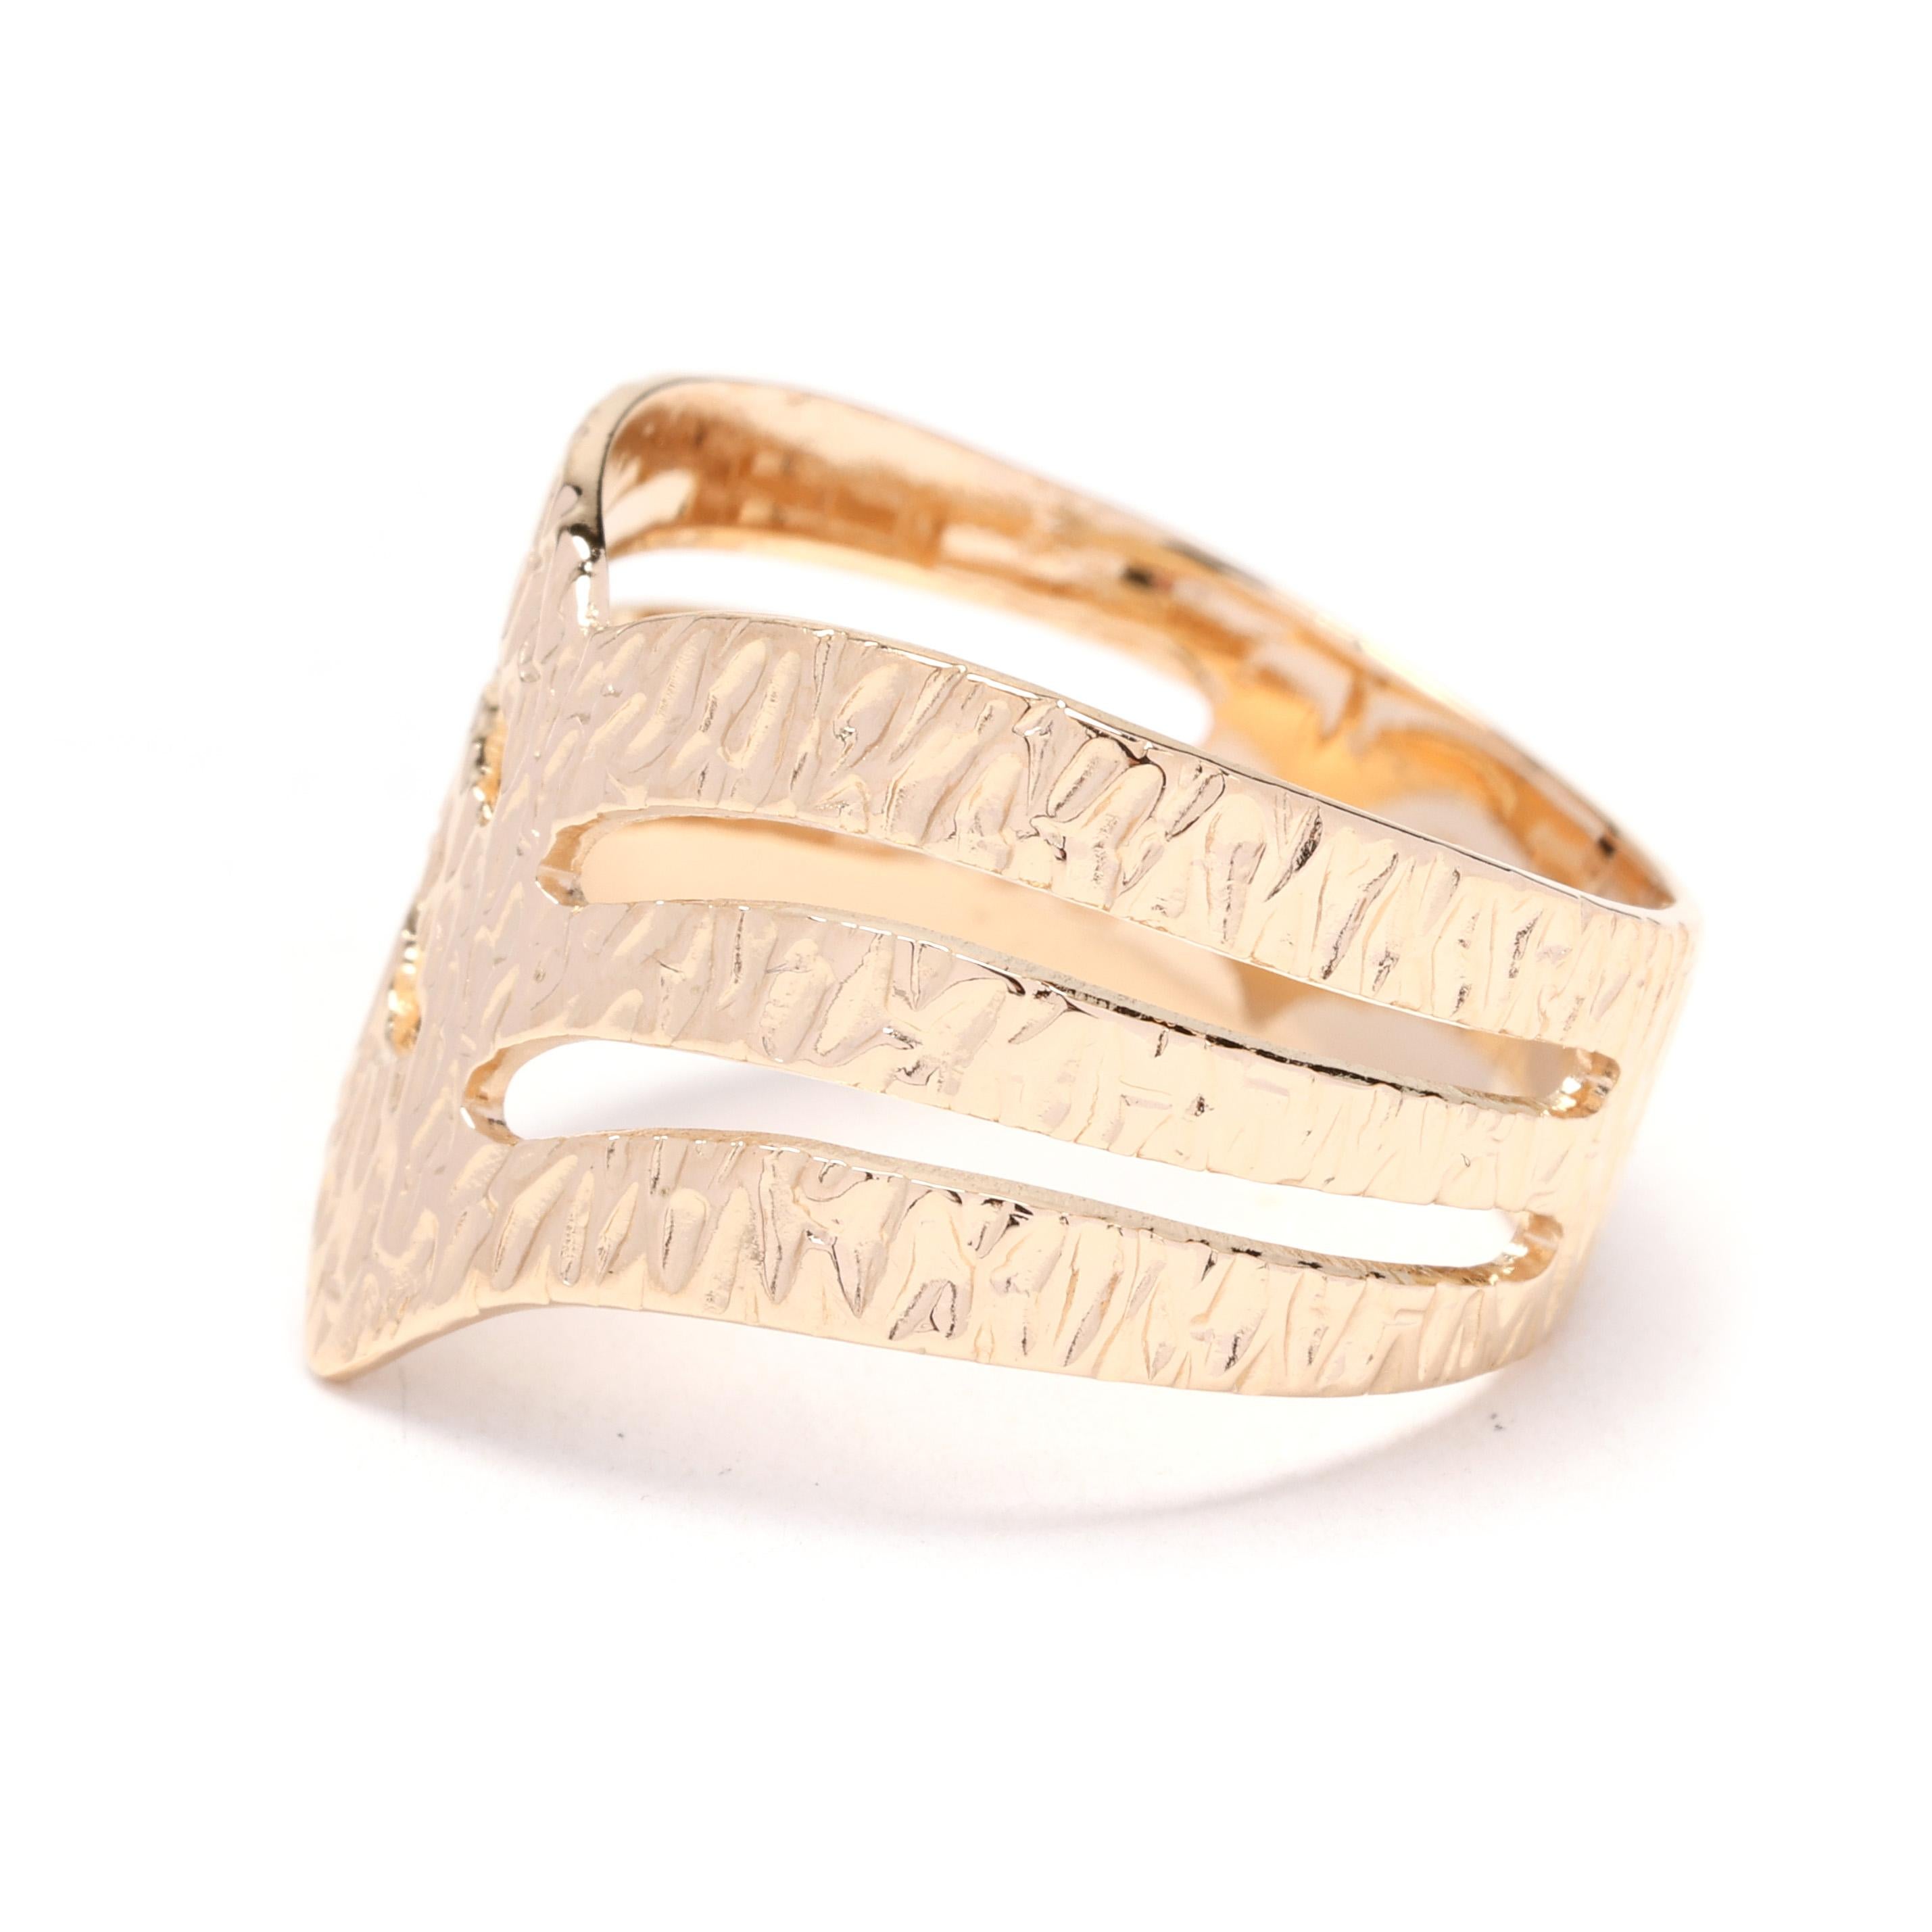 Thick Patterned Band Ring, 18k Yellow Gold, Ring Size 6.25, Textured Ring In Good Condition For Sale In McLeansville, NC